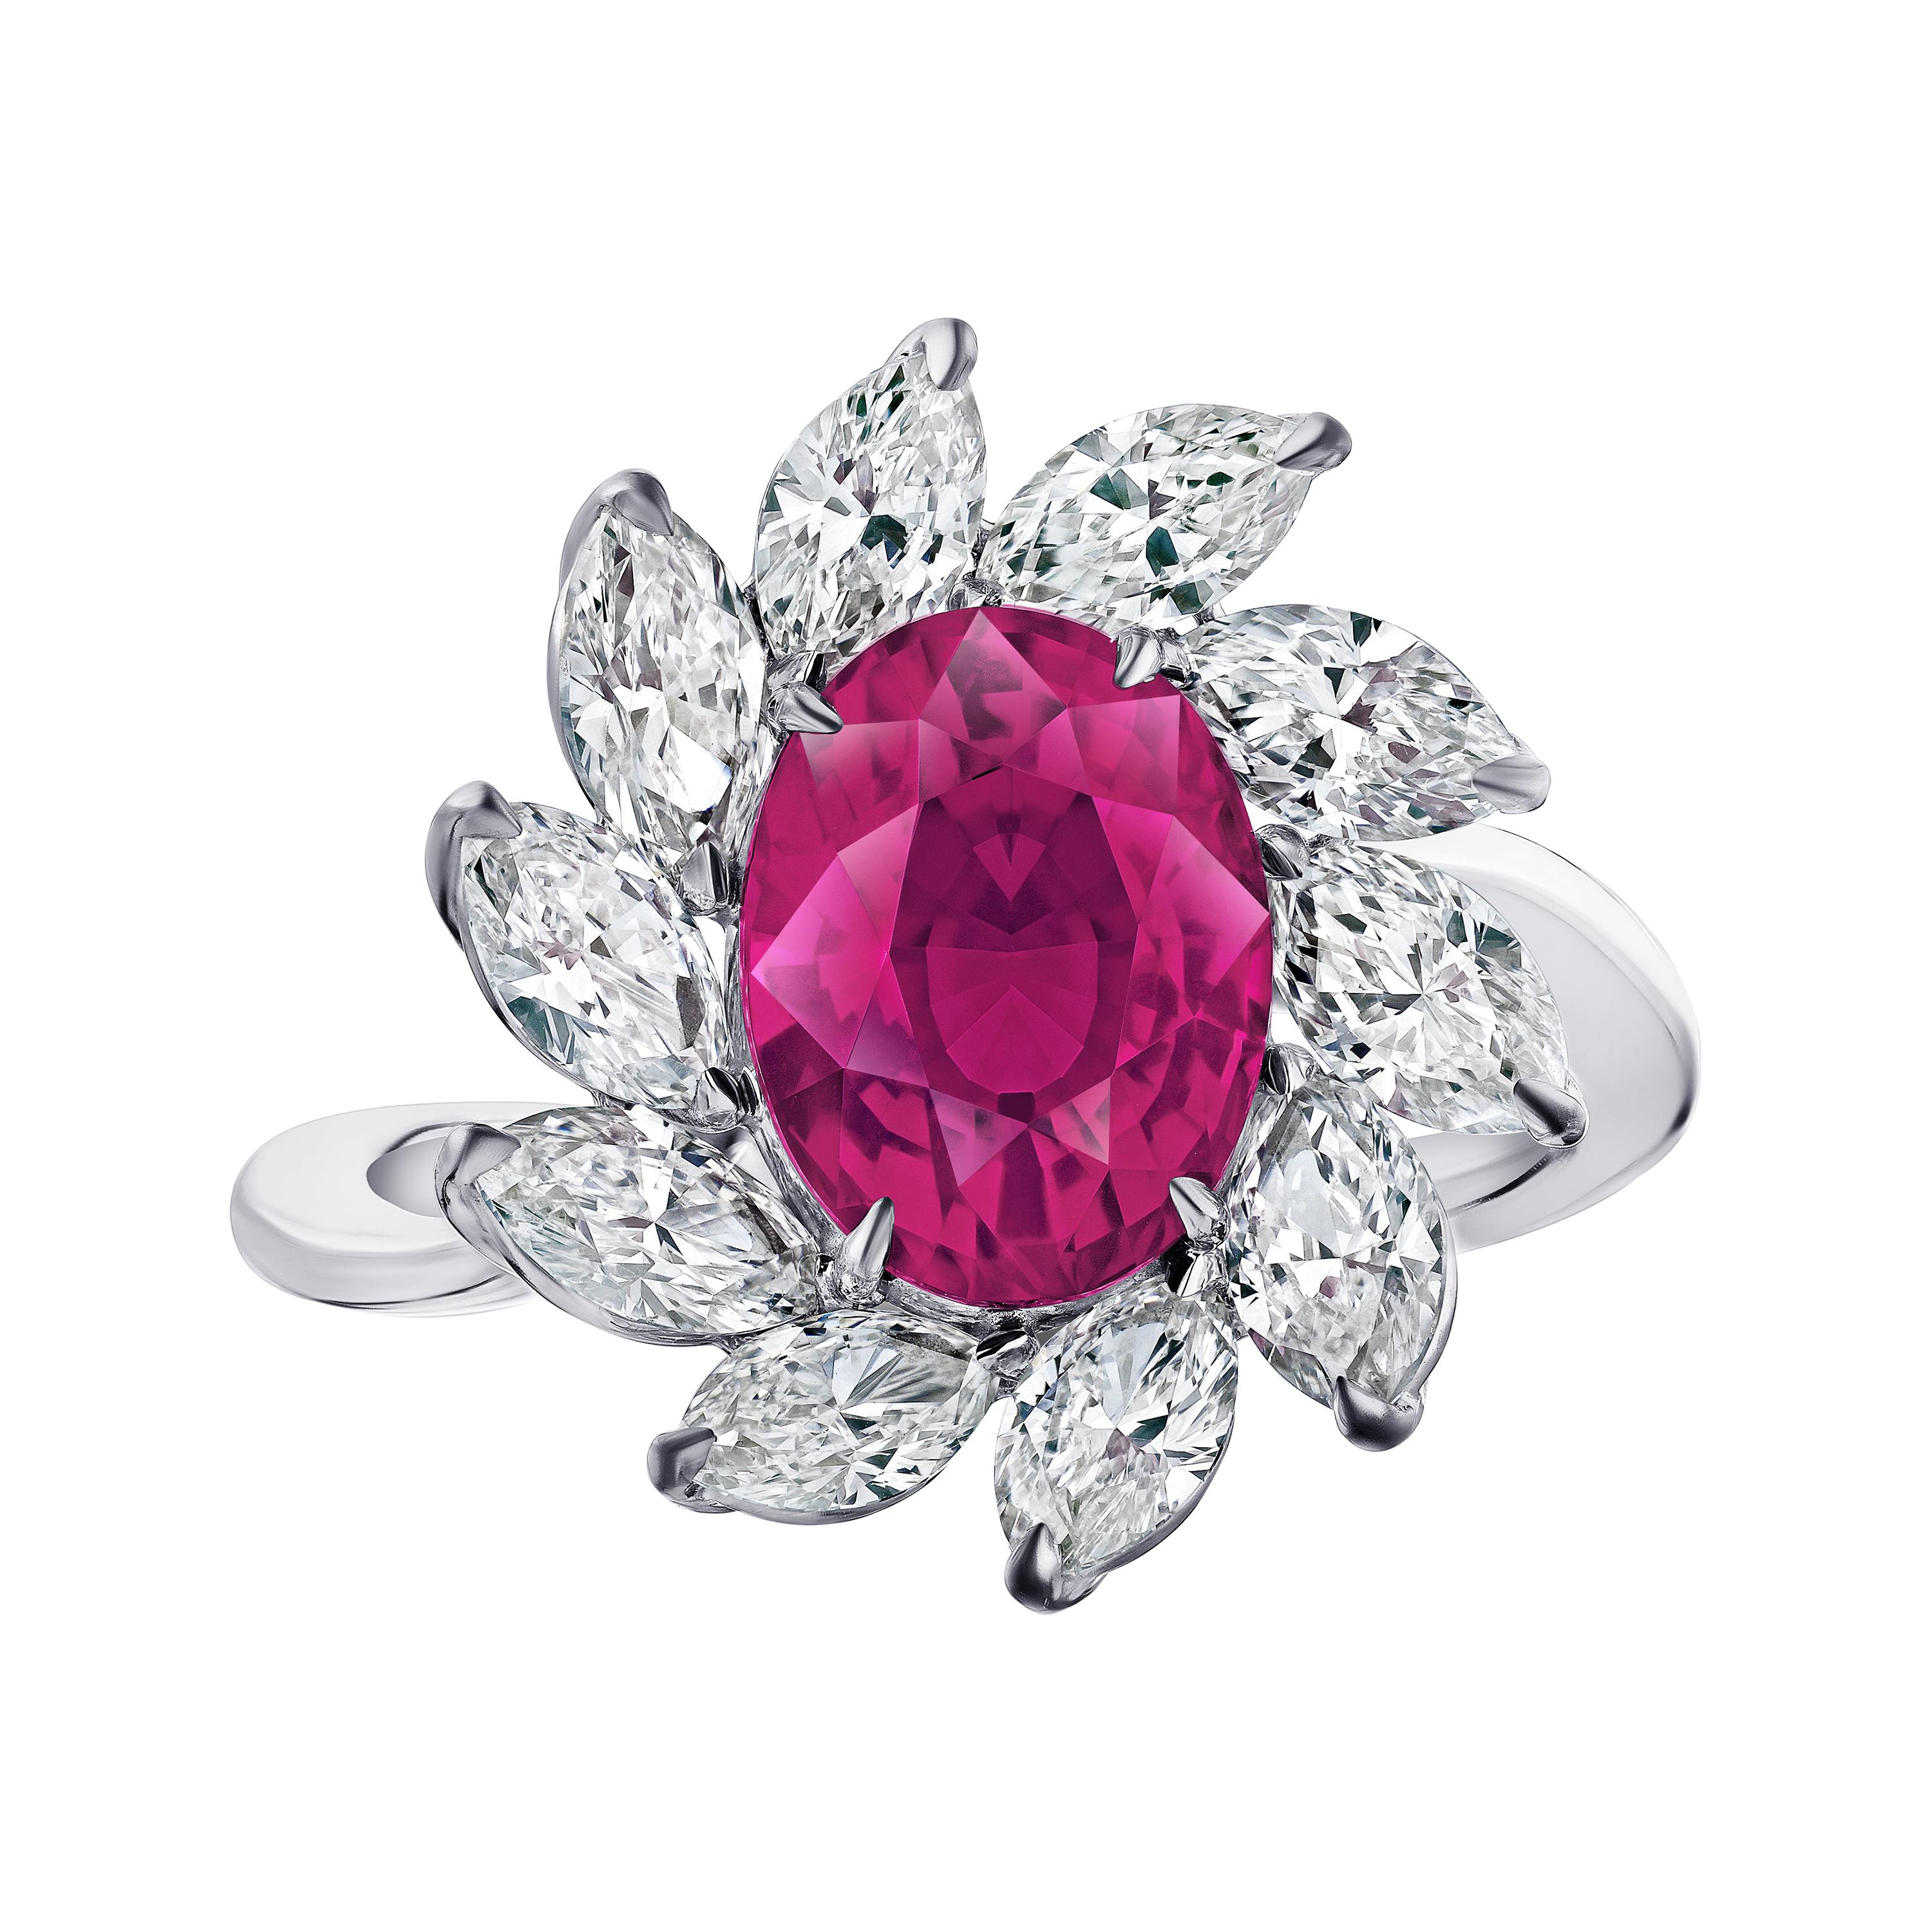 4.10 Carat Oval Red Ruby and Diamond Ring with GIA Report